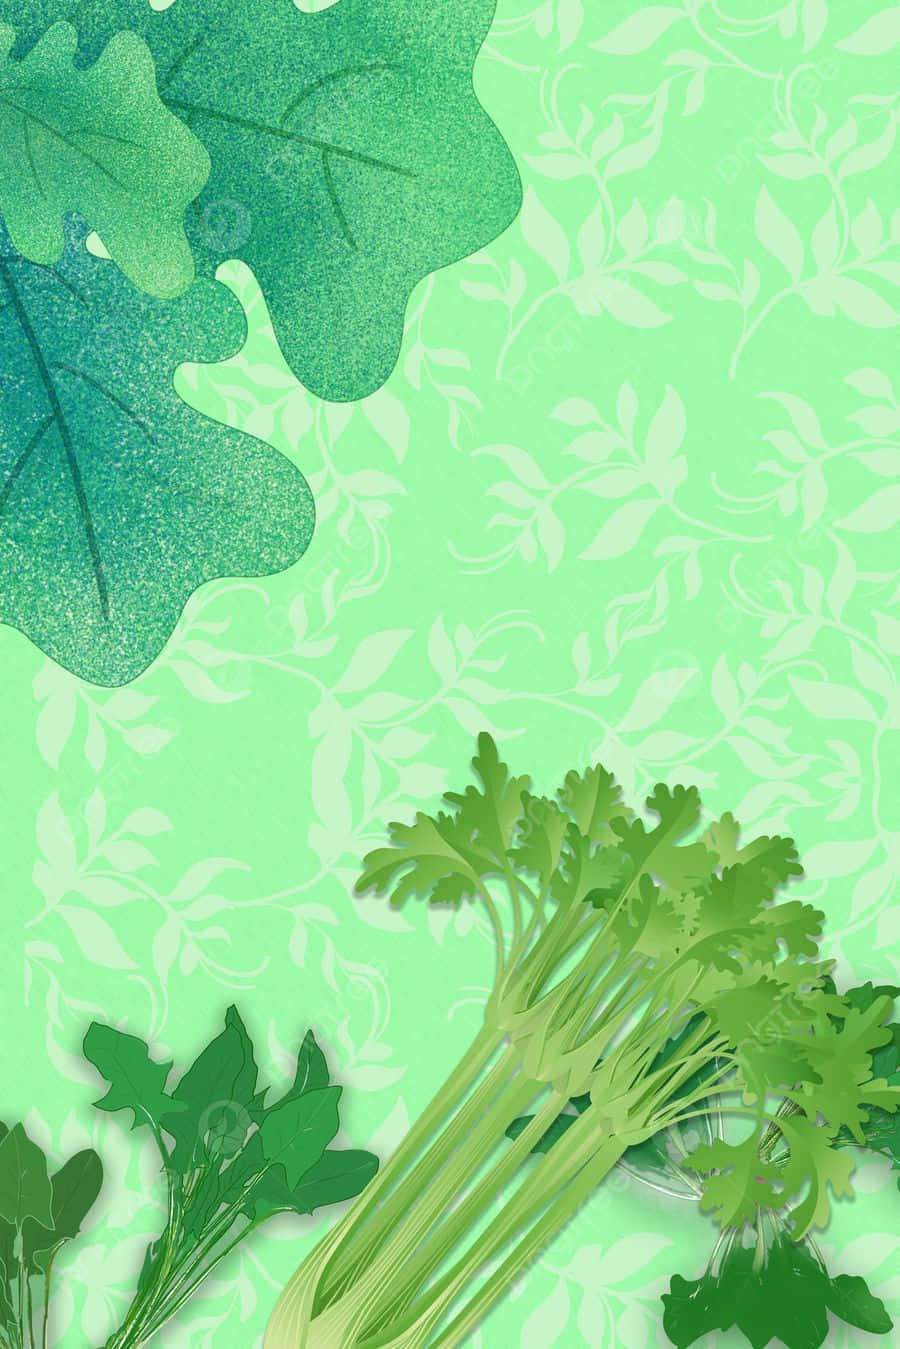 Green Nature Aesthetic Background Wallpaper